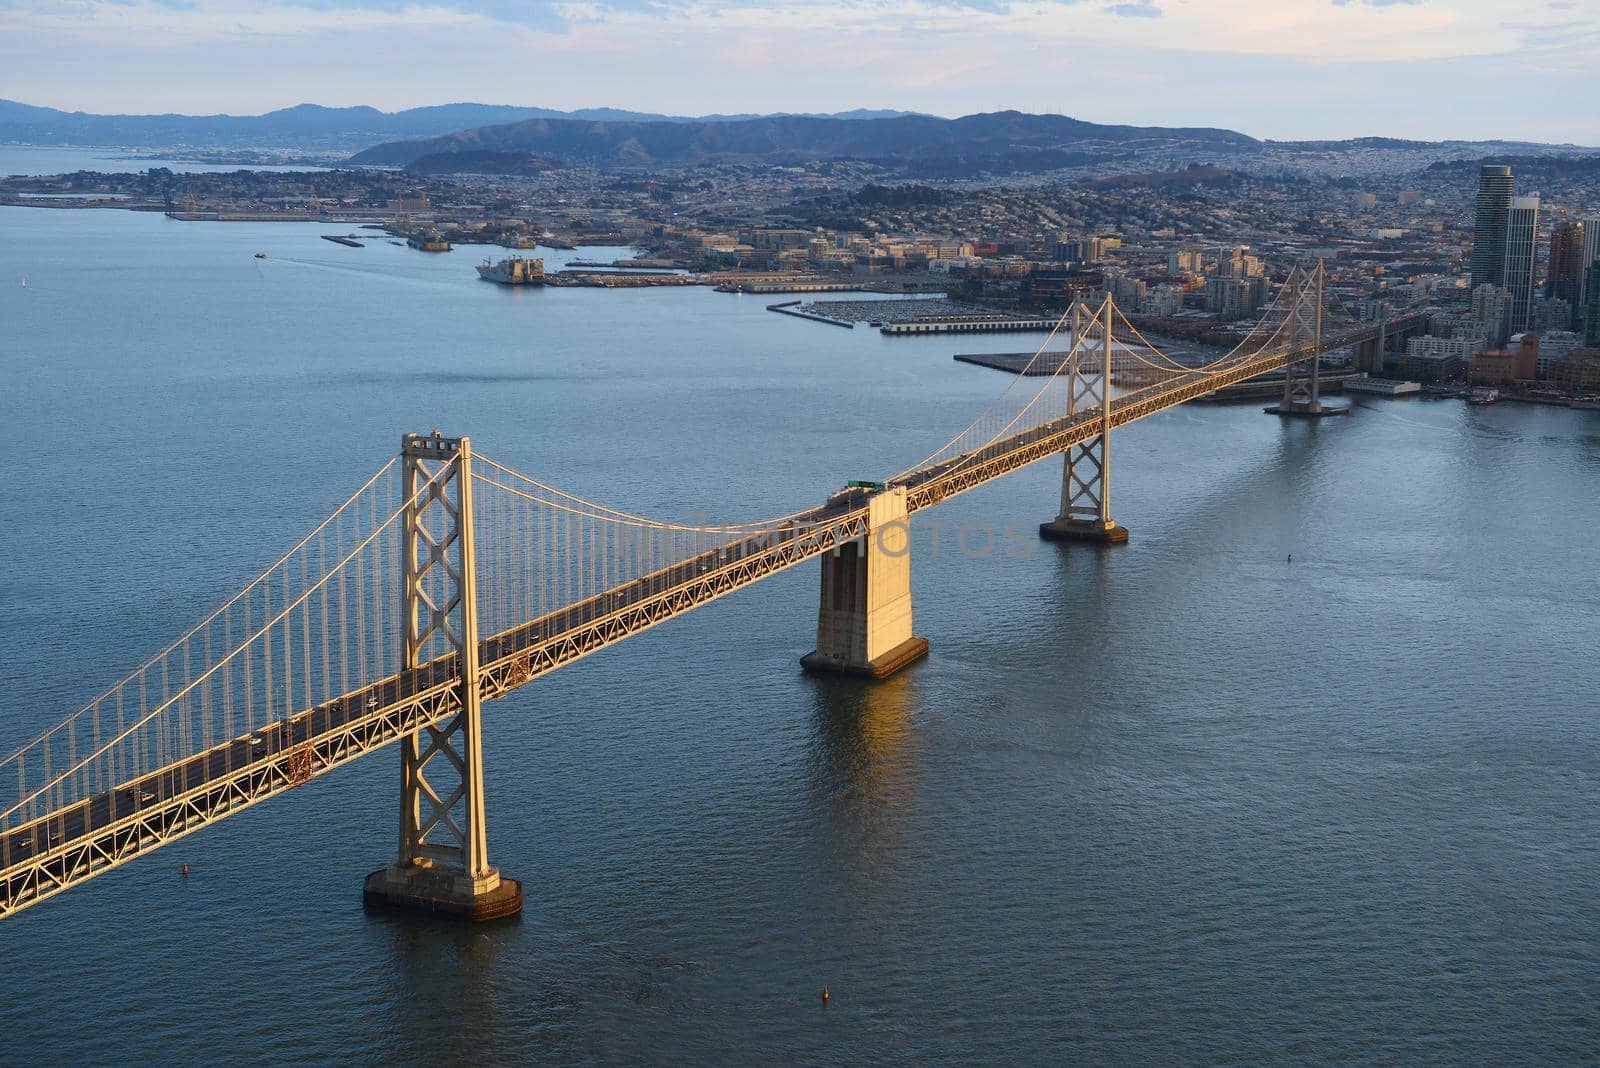 an aerial view of bay bridge near san francisco downtown during sunset, taken from a helicopter 